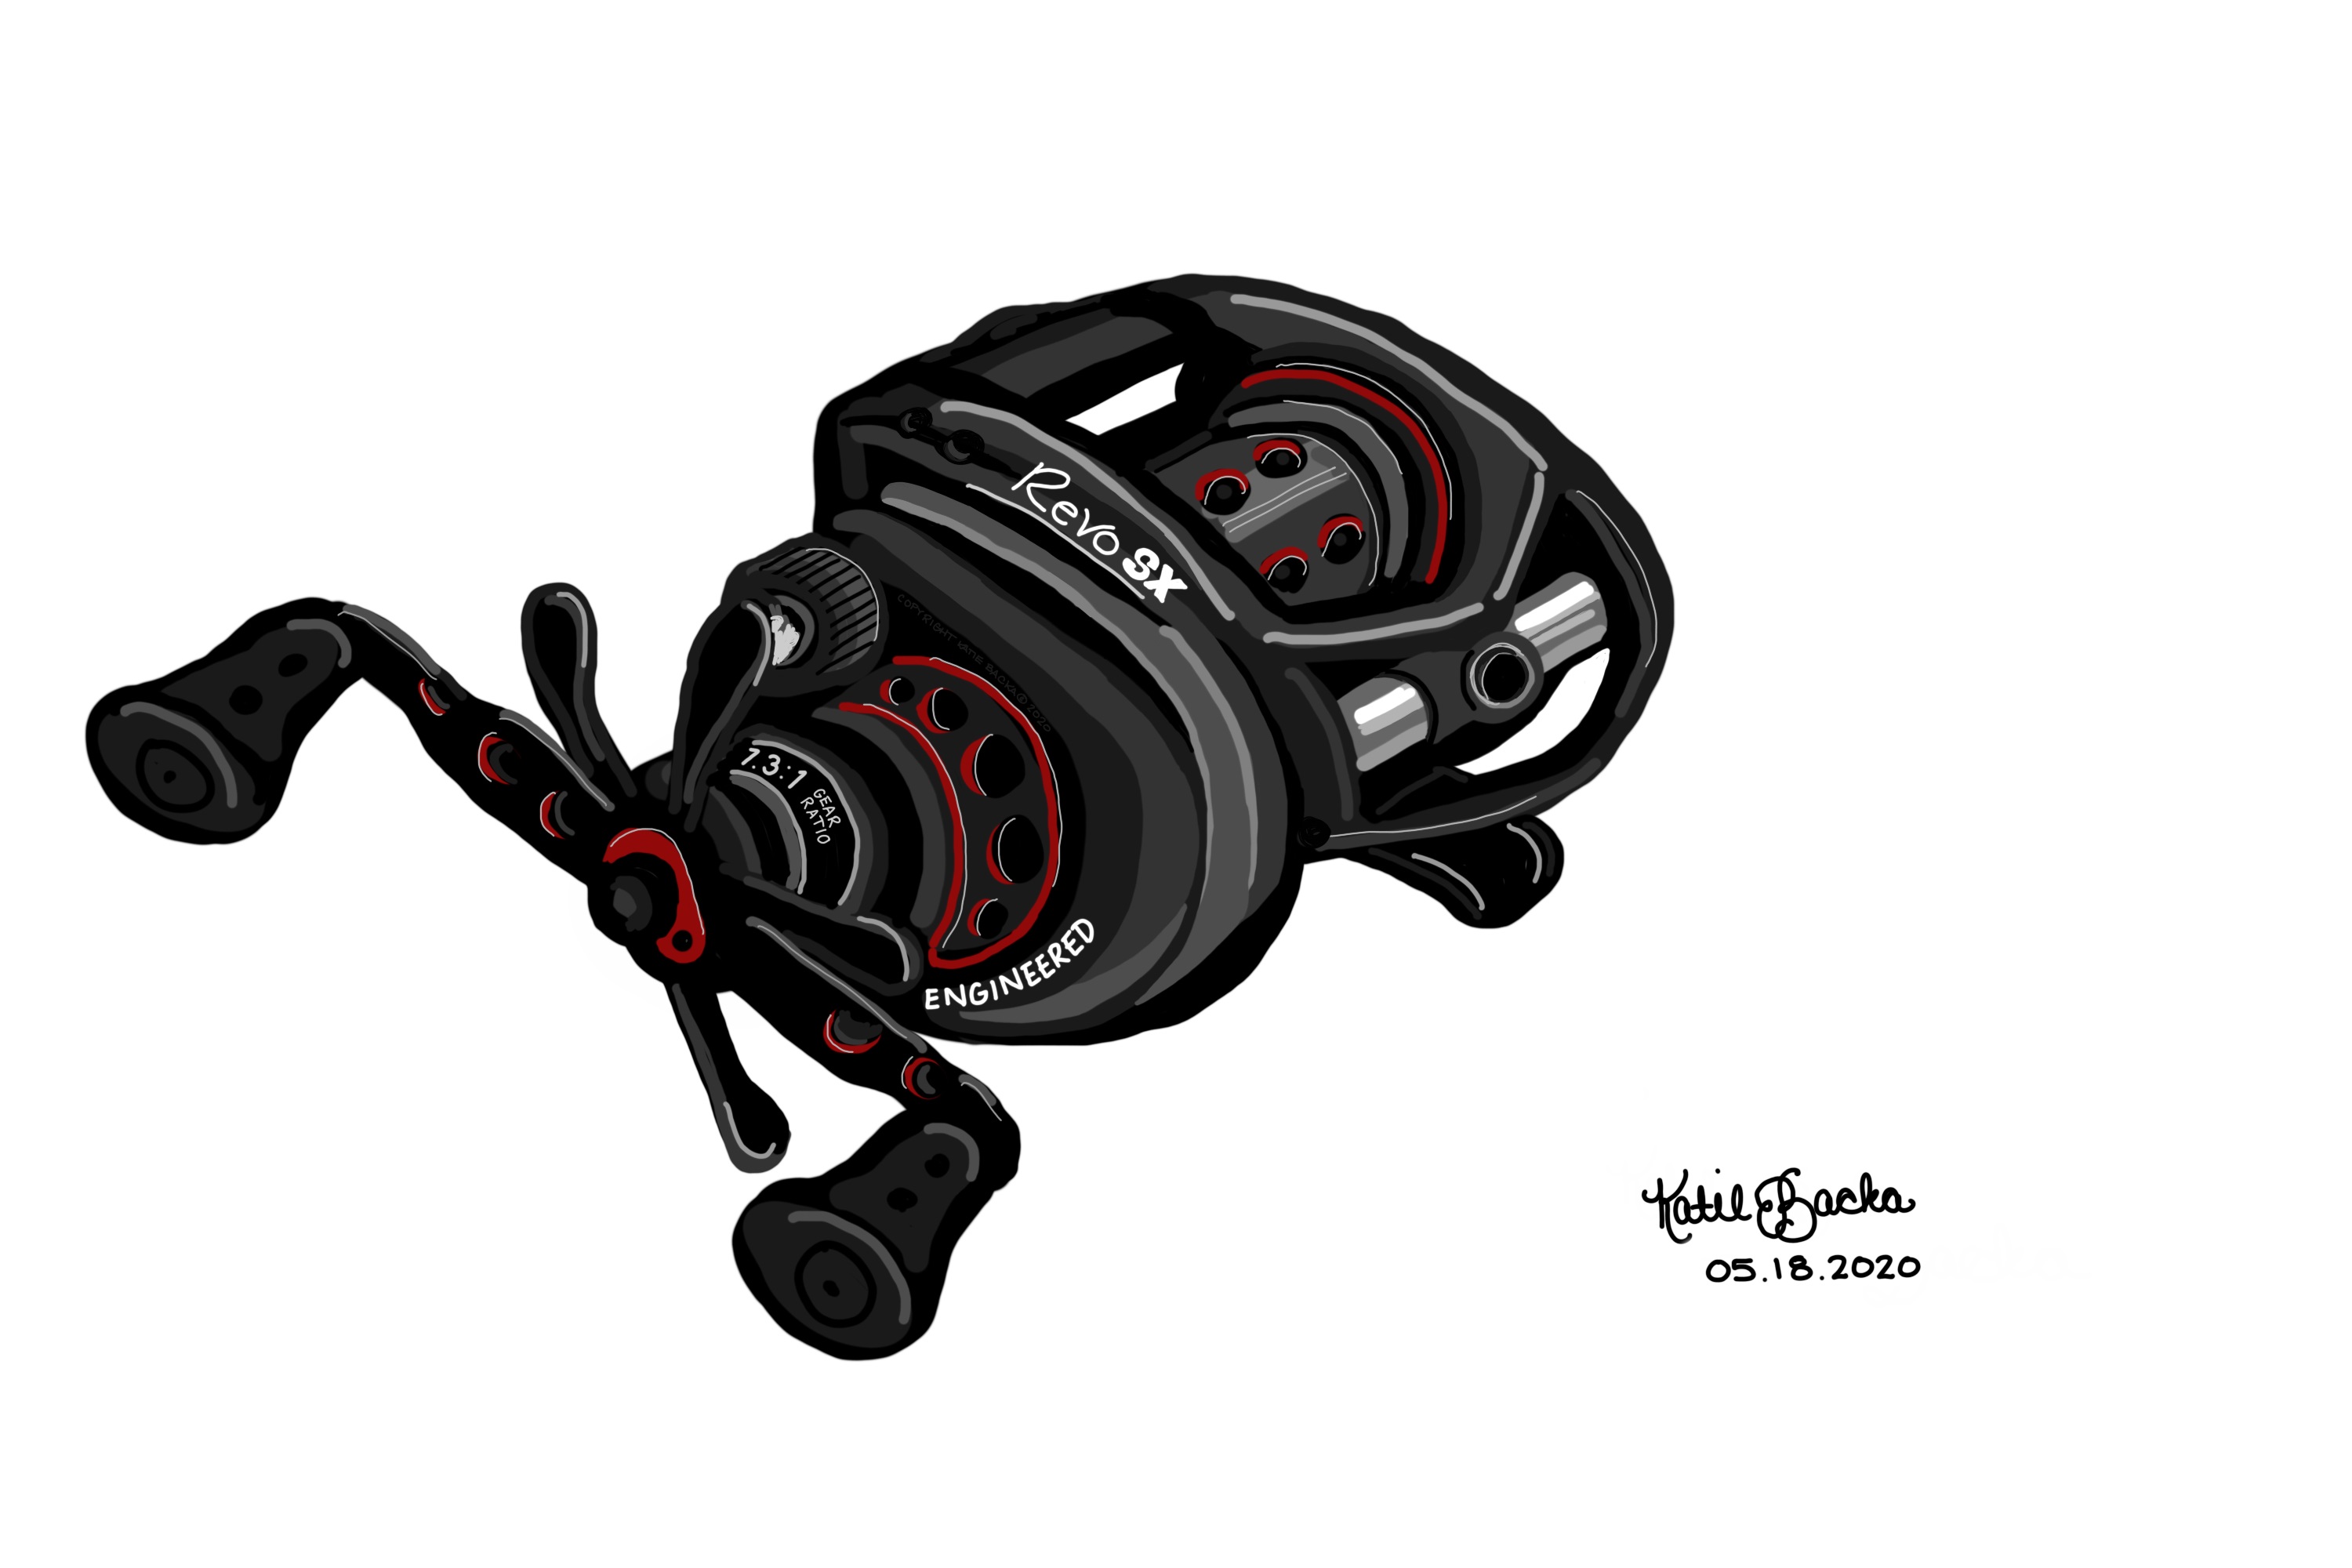 Artwork of a fishing baitcaster by Katie